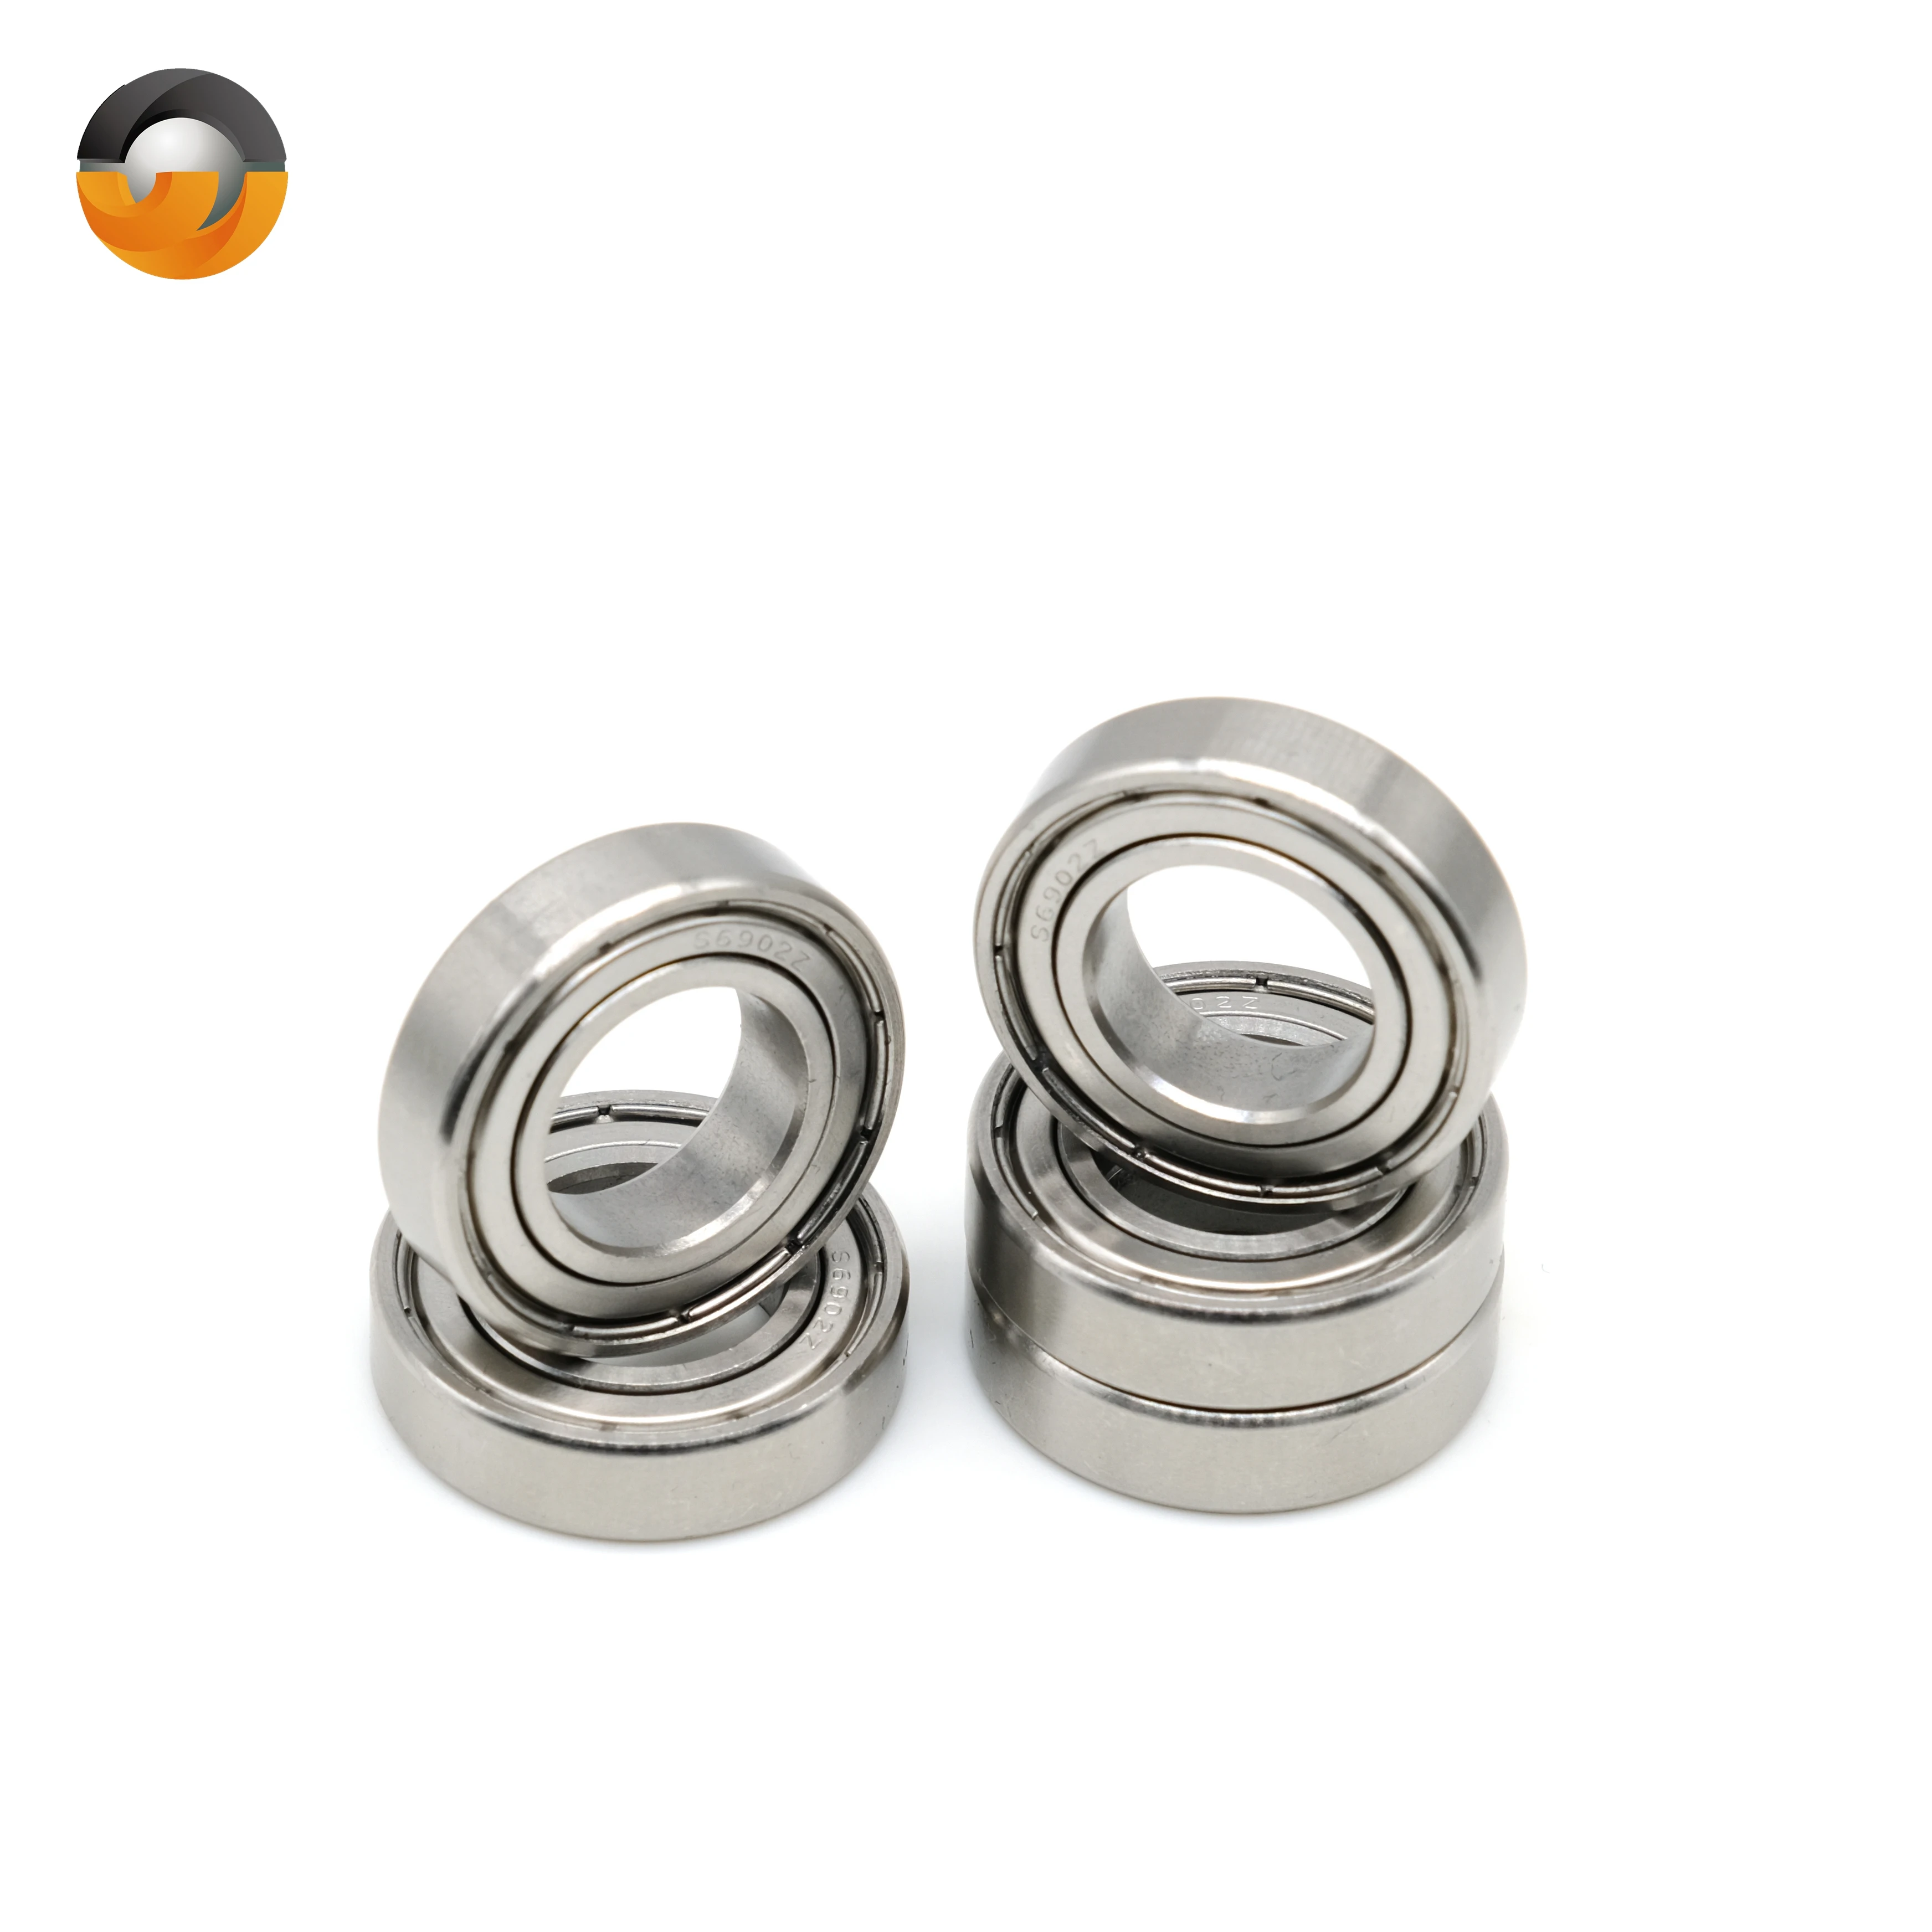 

5PCS 6903ZZ 17x30x7mm Bearing ABEC-7 Thin Section Ball Bearing Deep Groove Ball Bearings for Bicycle Parts